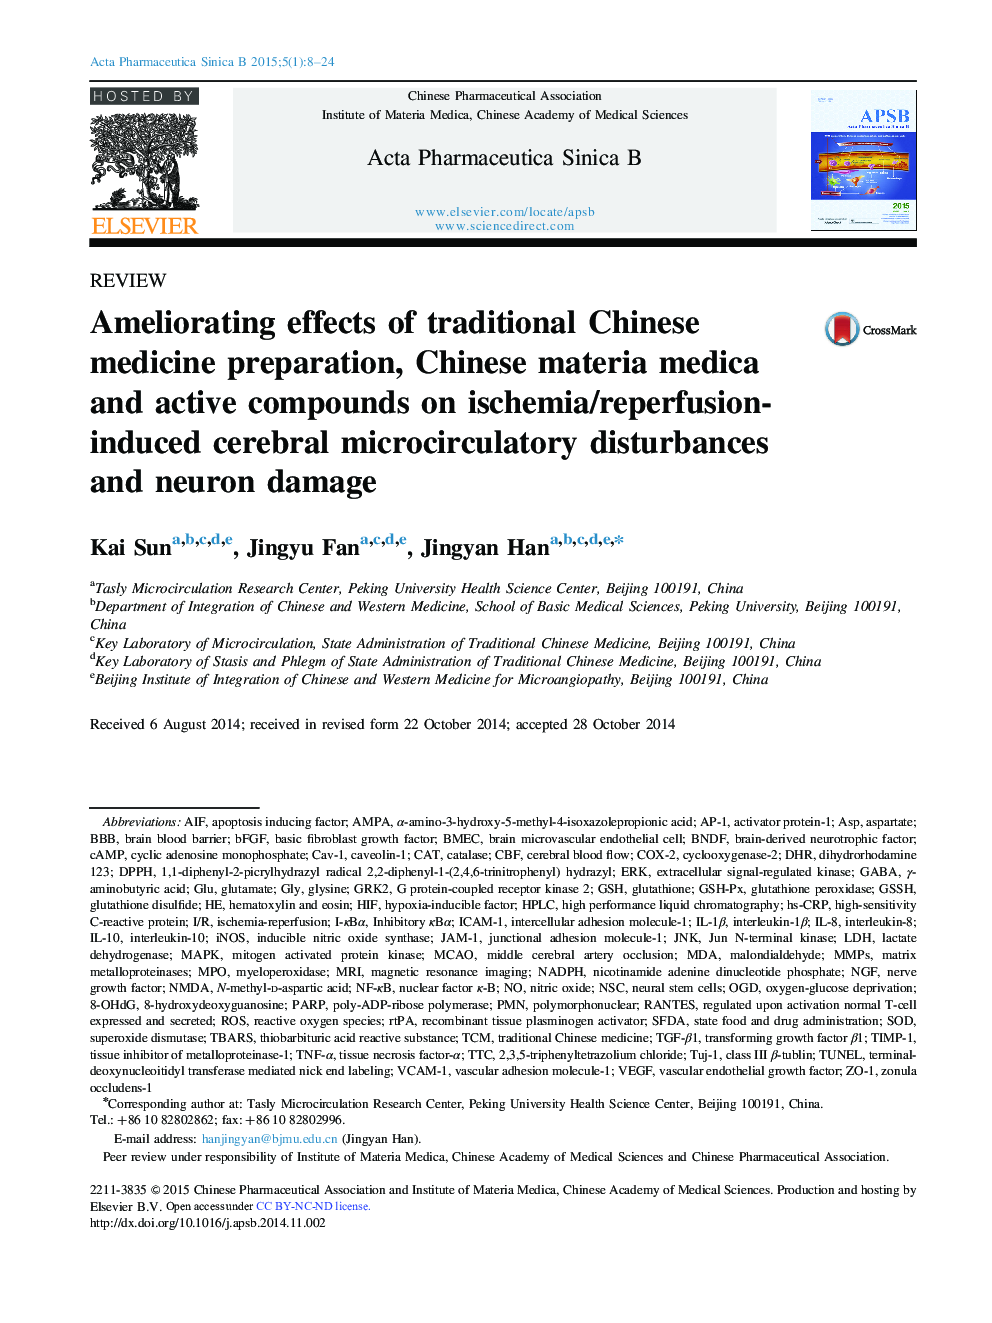 Ameliorating effects of traditional Chinese medicine preparation, Chinese materia medica and active compounds on ischemia/reperfusion-induced cerebral microcirculatory disturbances and neuron damage 